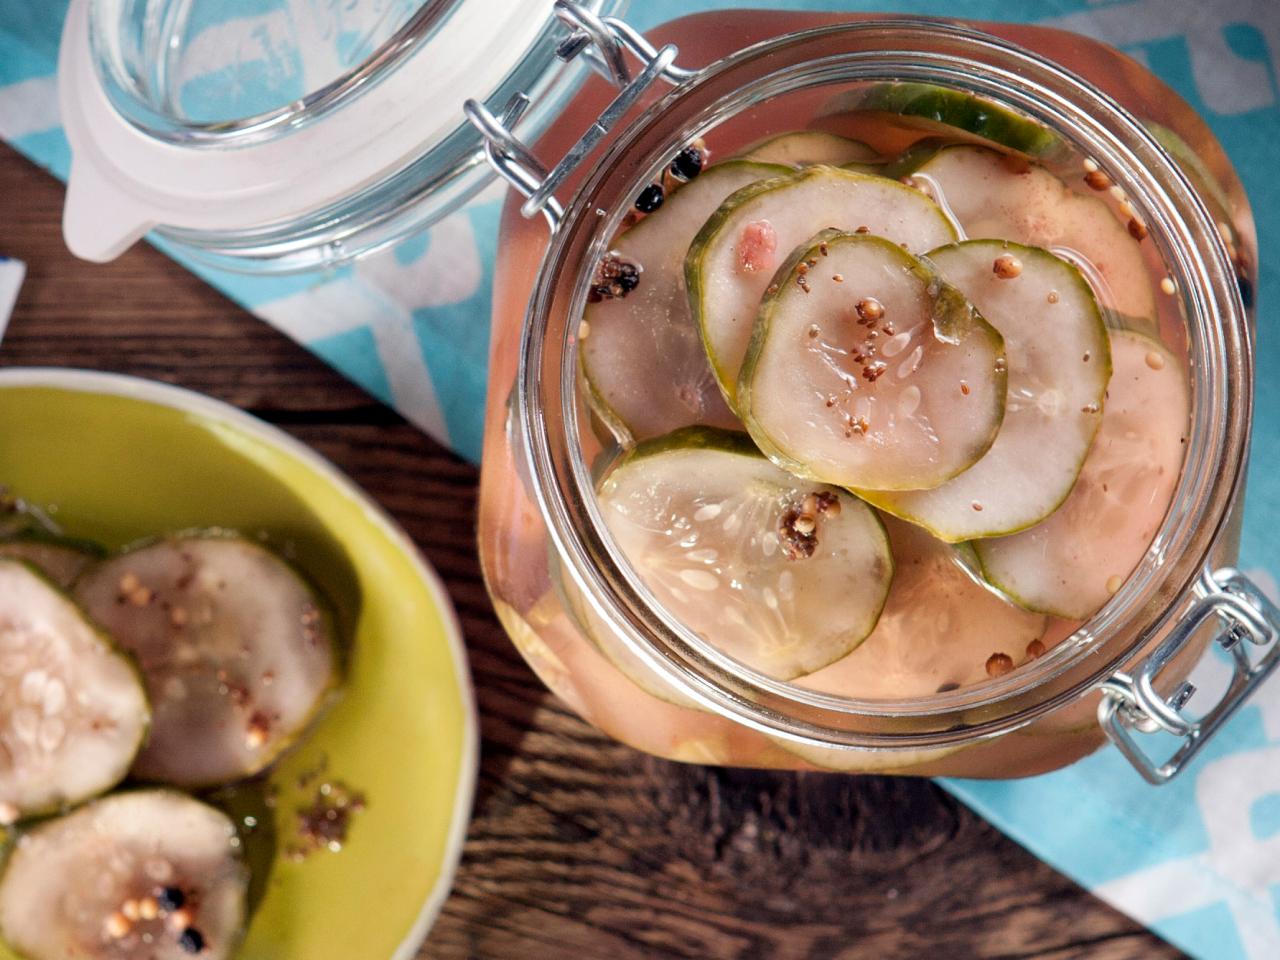 DIY Foodie Gift: 7 Easy Recipes for Pickled Veggies